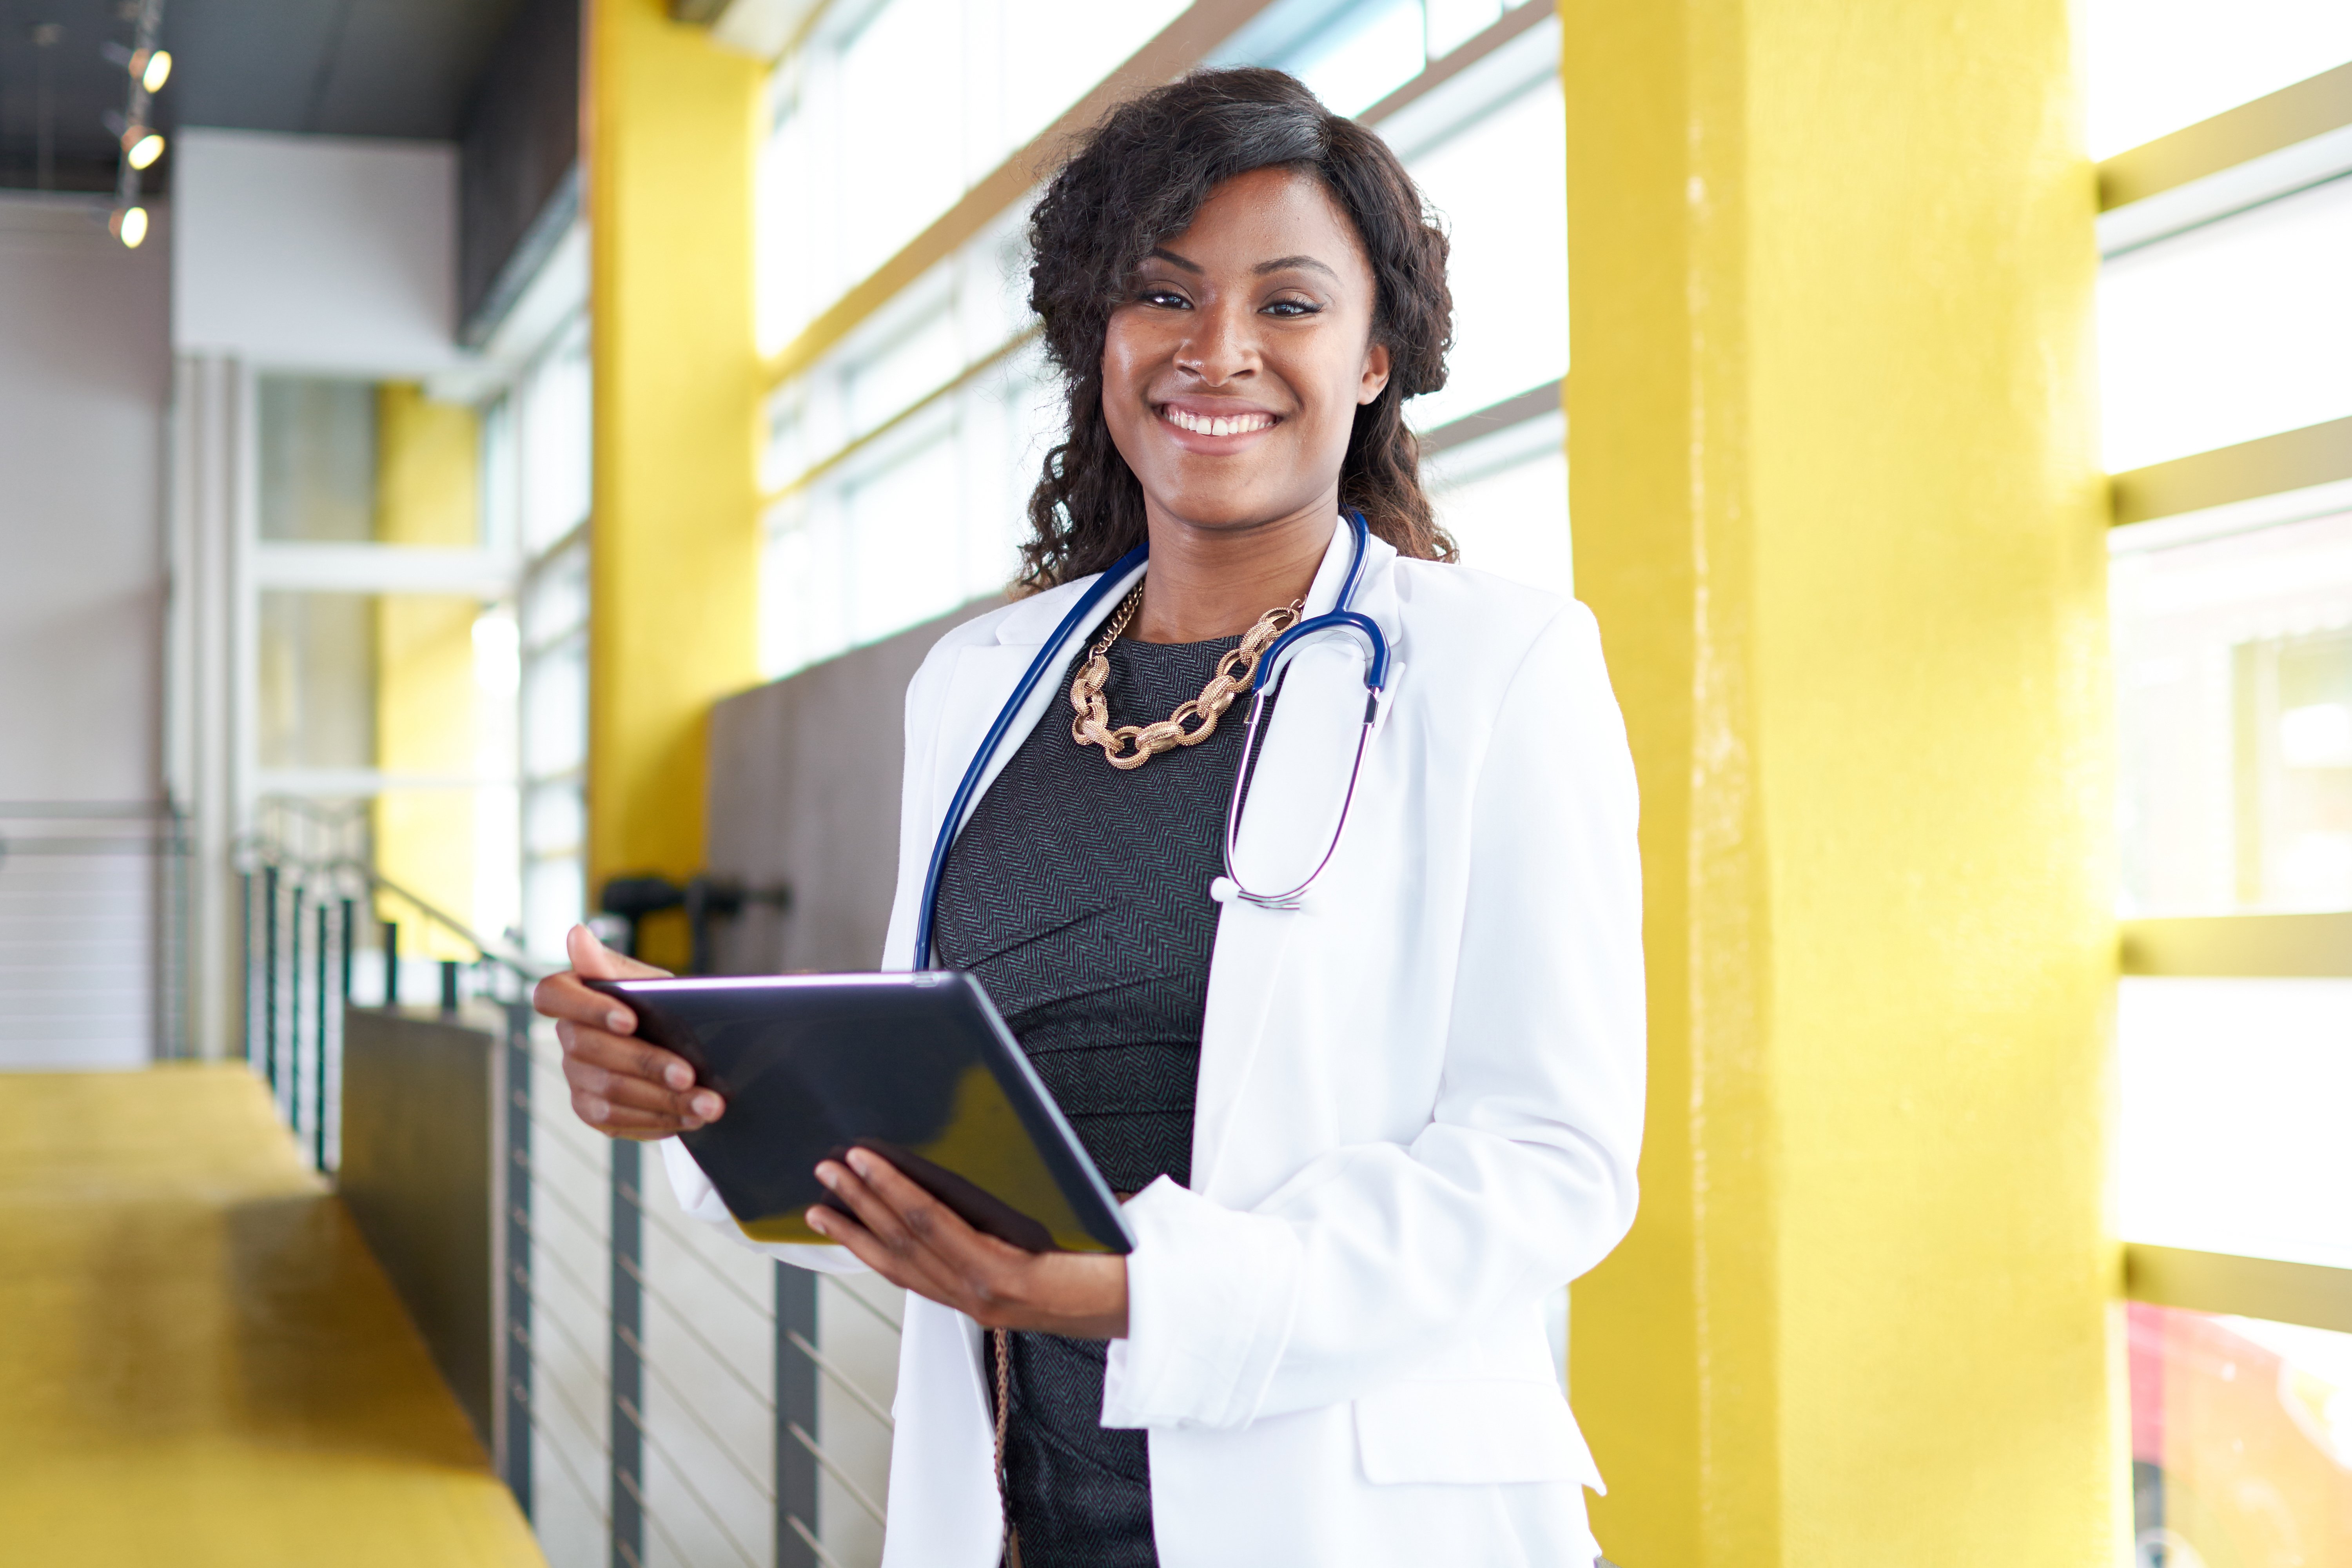 Female doctor holding a tablet. 2021 healthcare staffing trends.